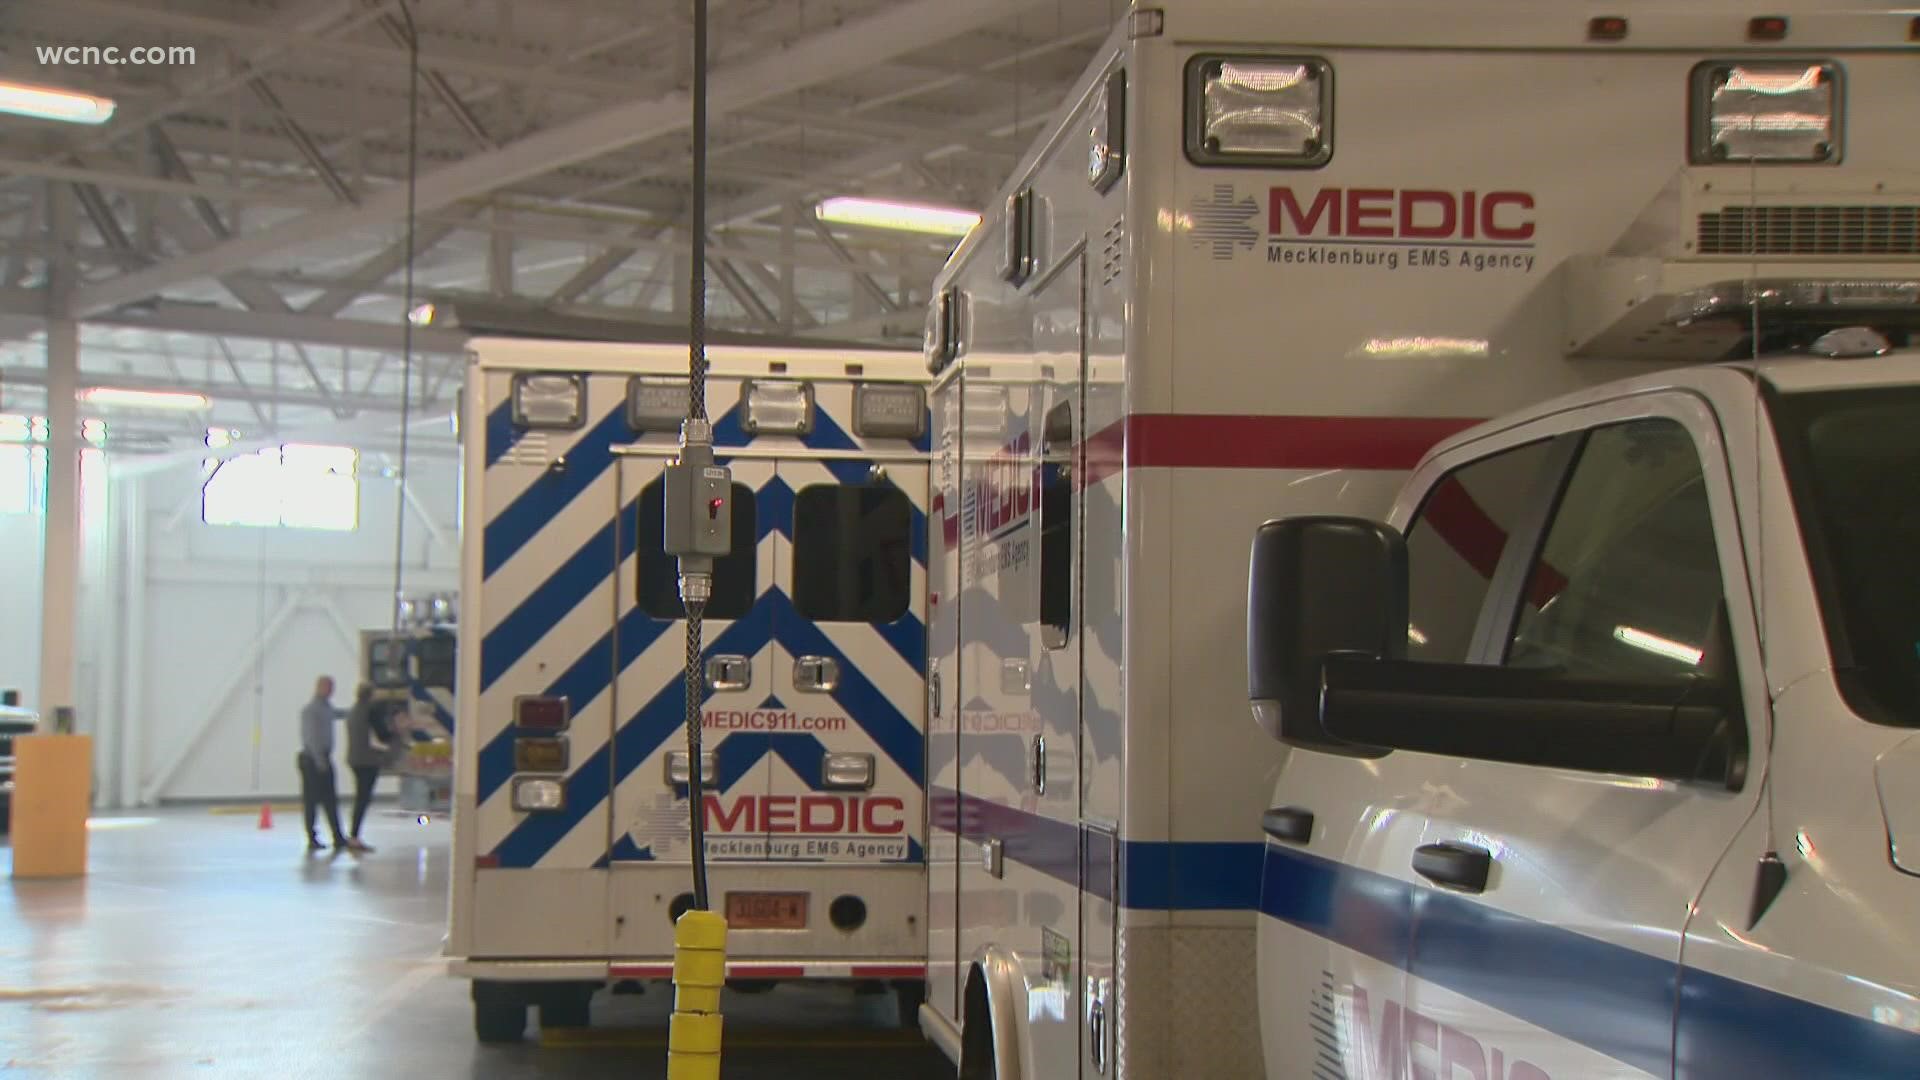 From power crews to paramedics, everyone in the region is preparing for the worst yet hoping for the best.